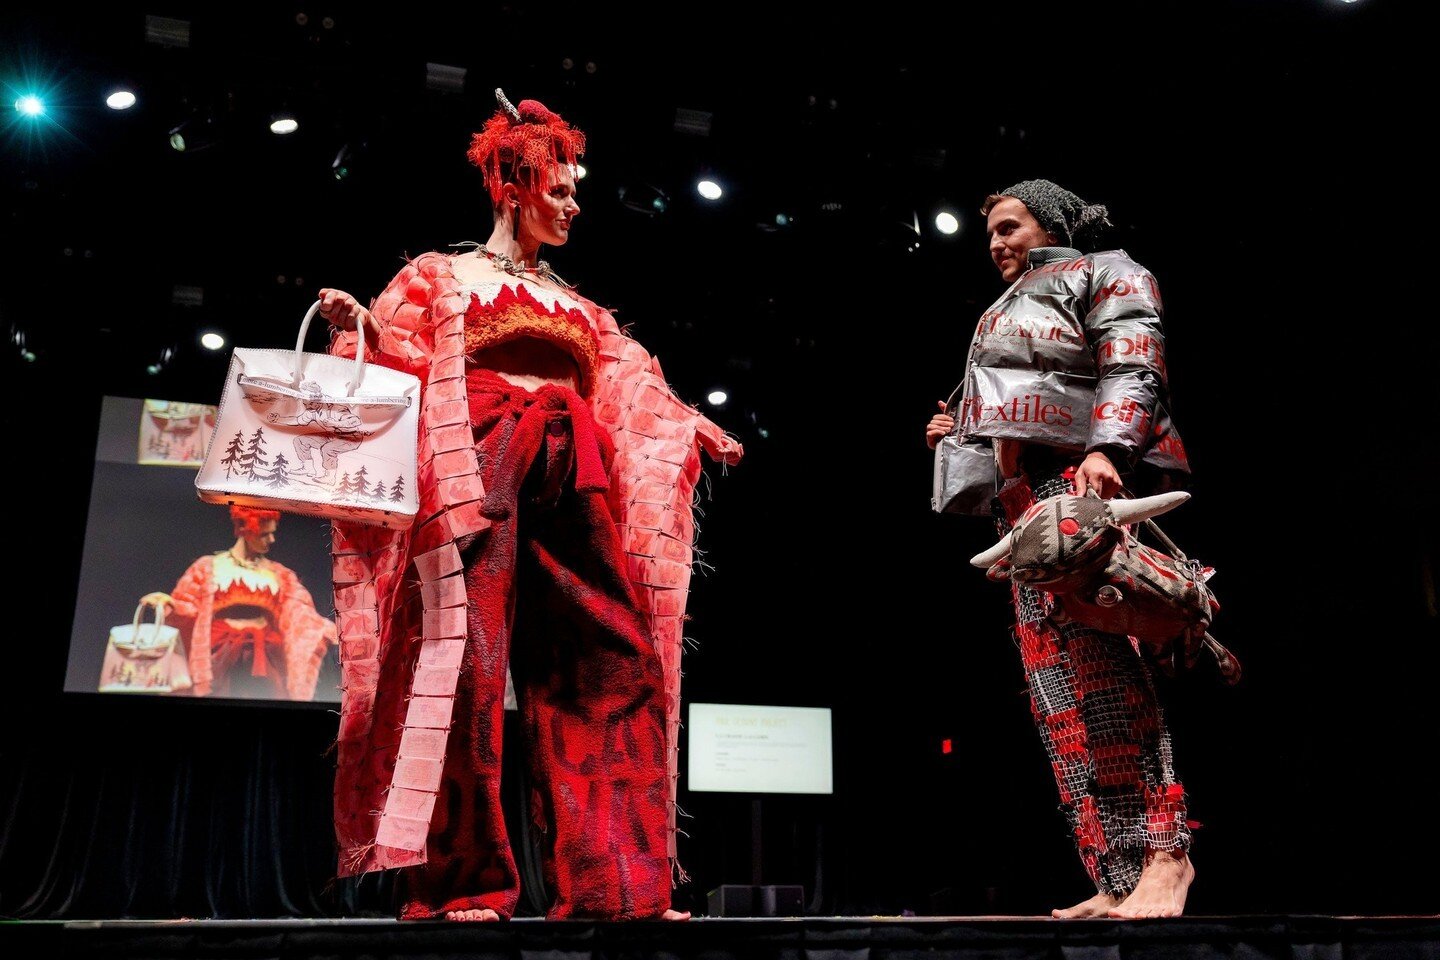 We're still over the moon about our win at the IIDA Fashion Show for Best Use of Materials. 🙌⁠
⁠
Learn more about the show, our partners we worked with, and more through the article on our website featuring the event. 😊⁠
⁠
Follow the link in our bi